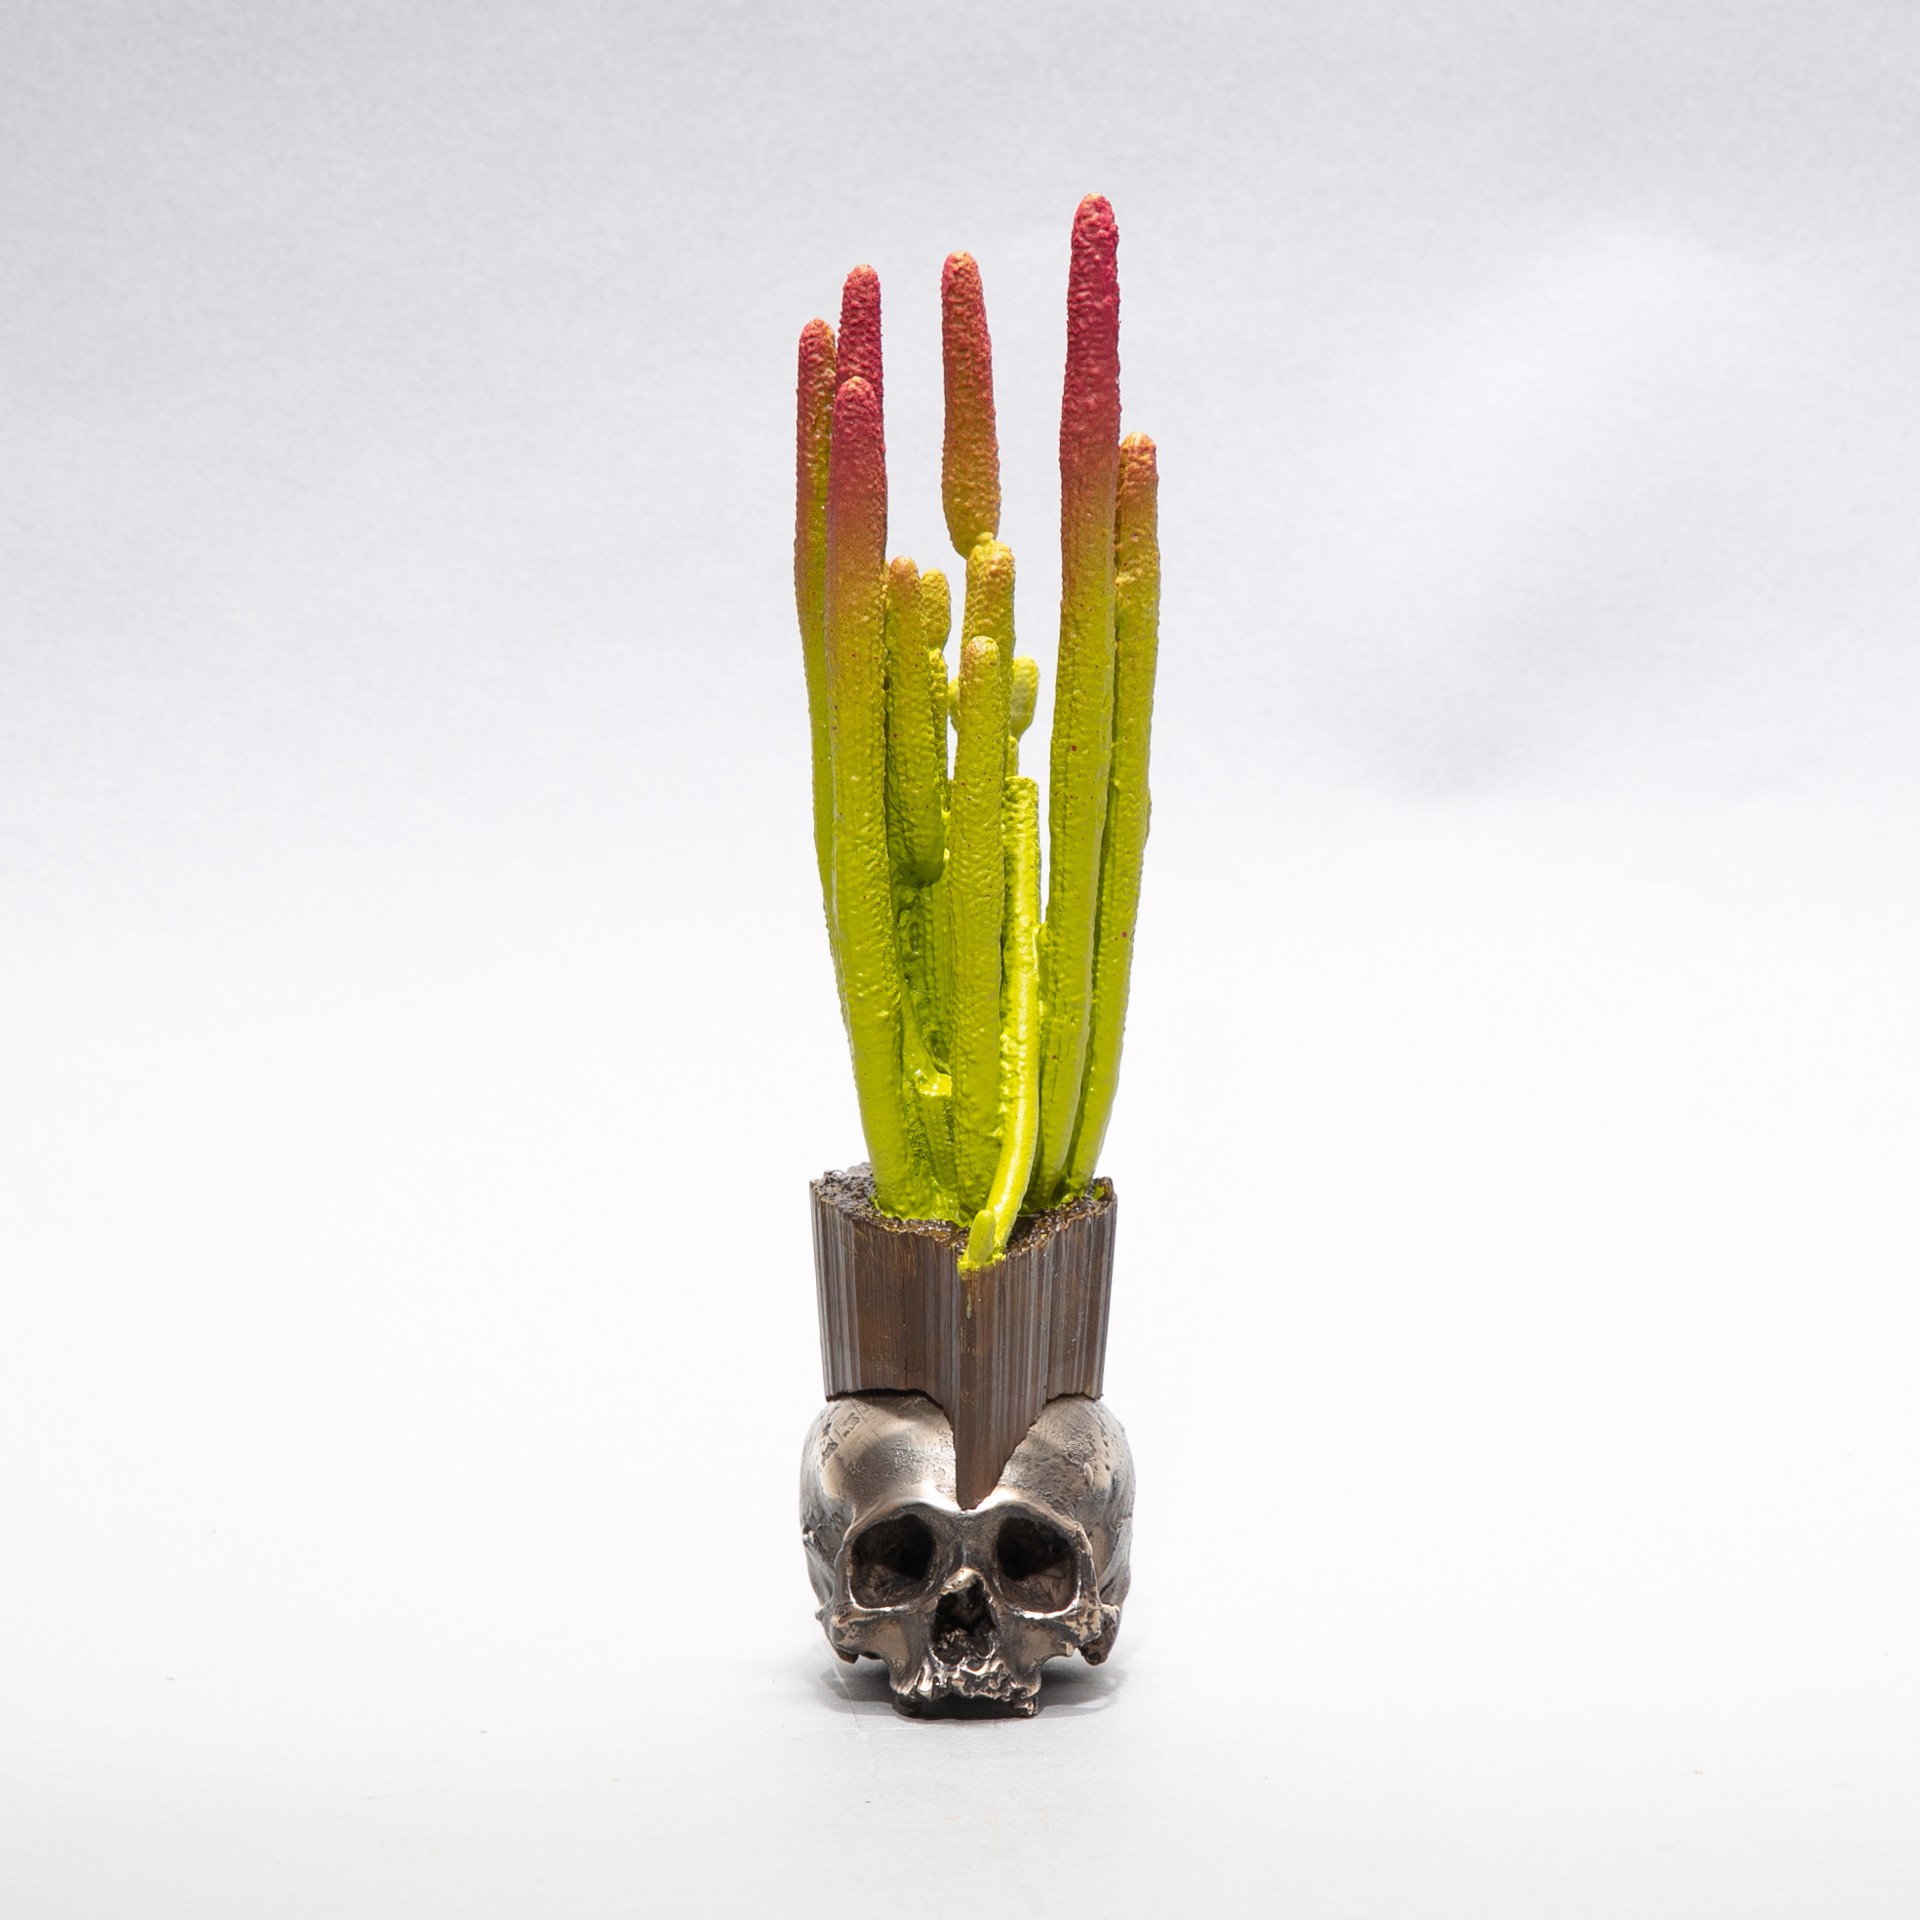 "Cactus Skull 3" by Dana Younger